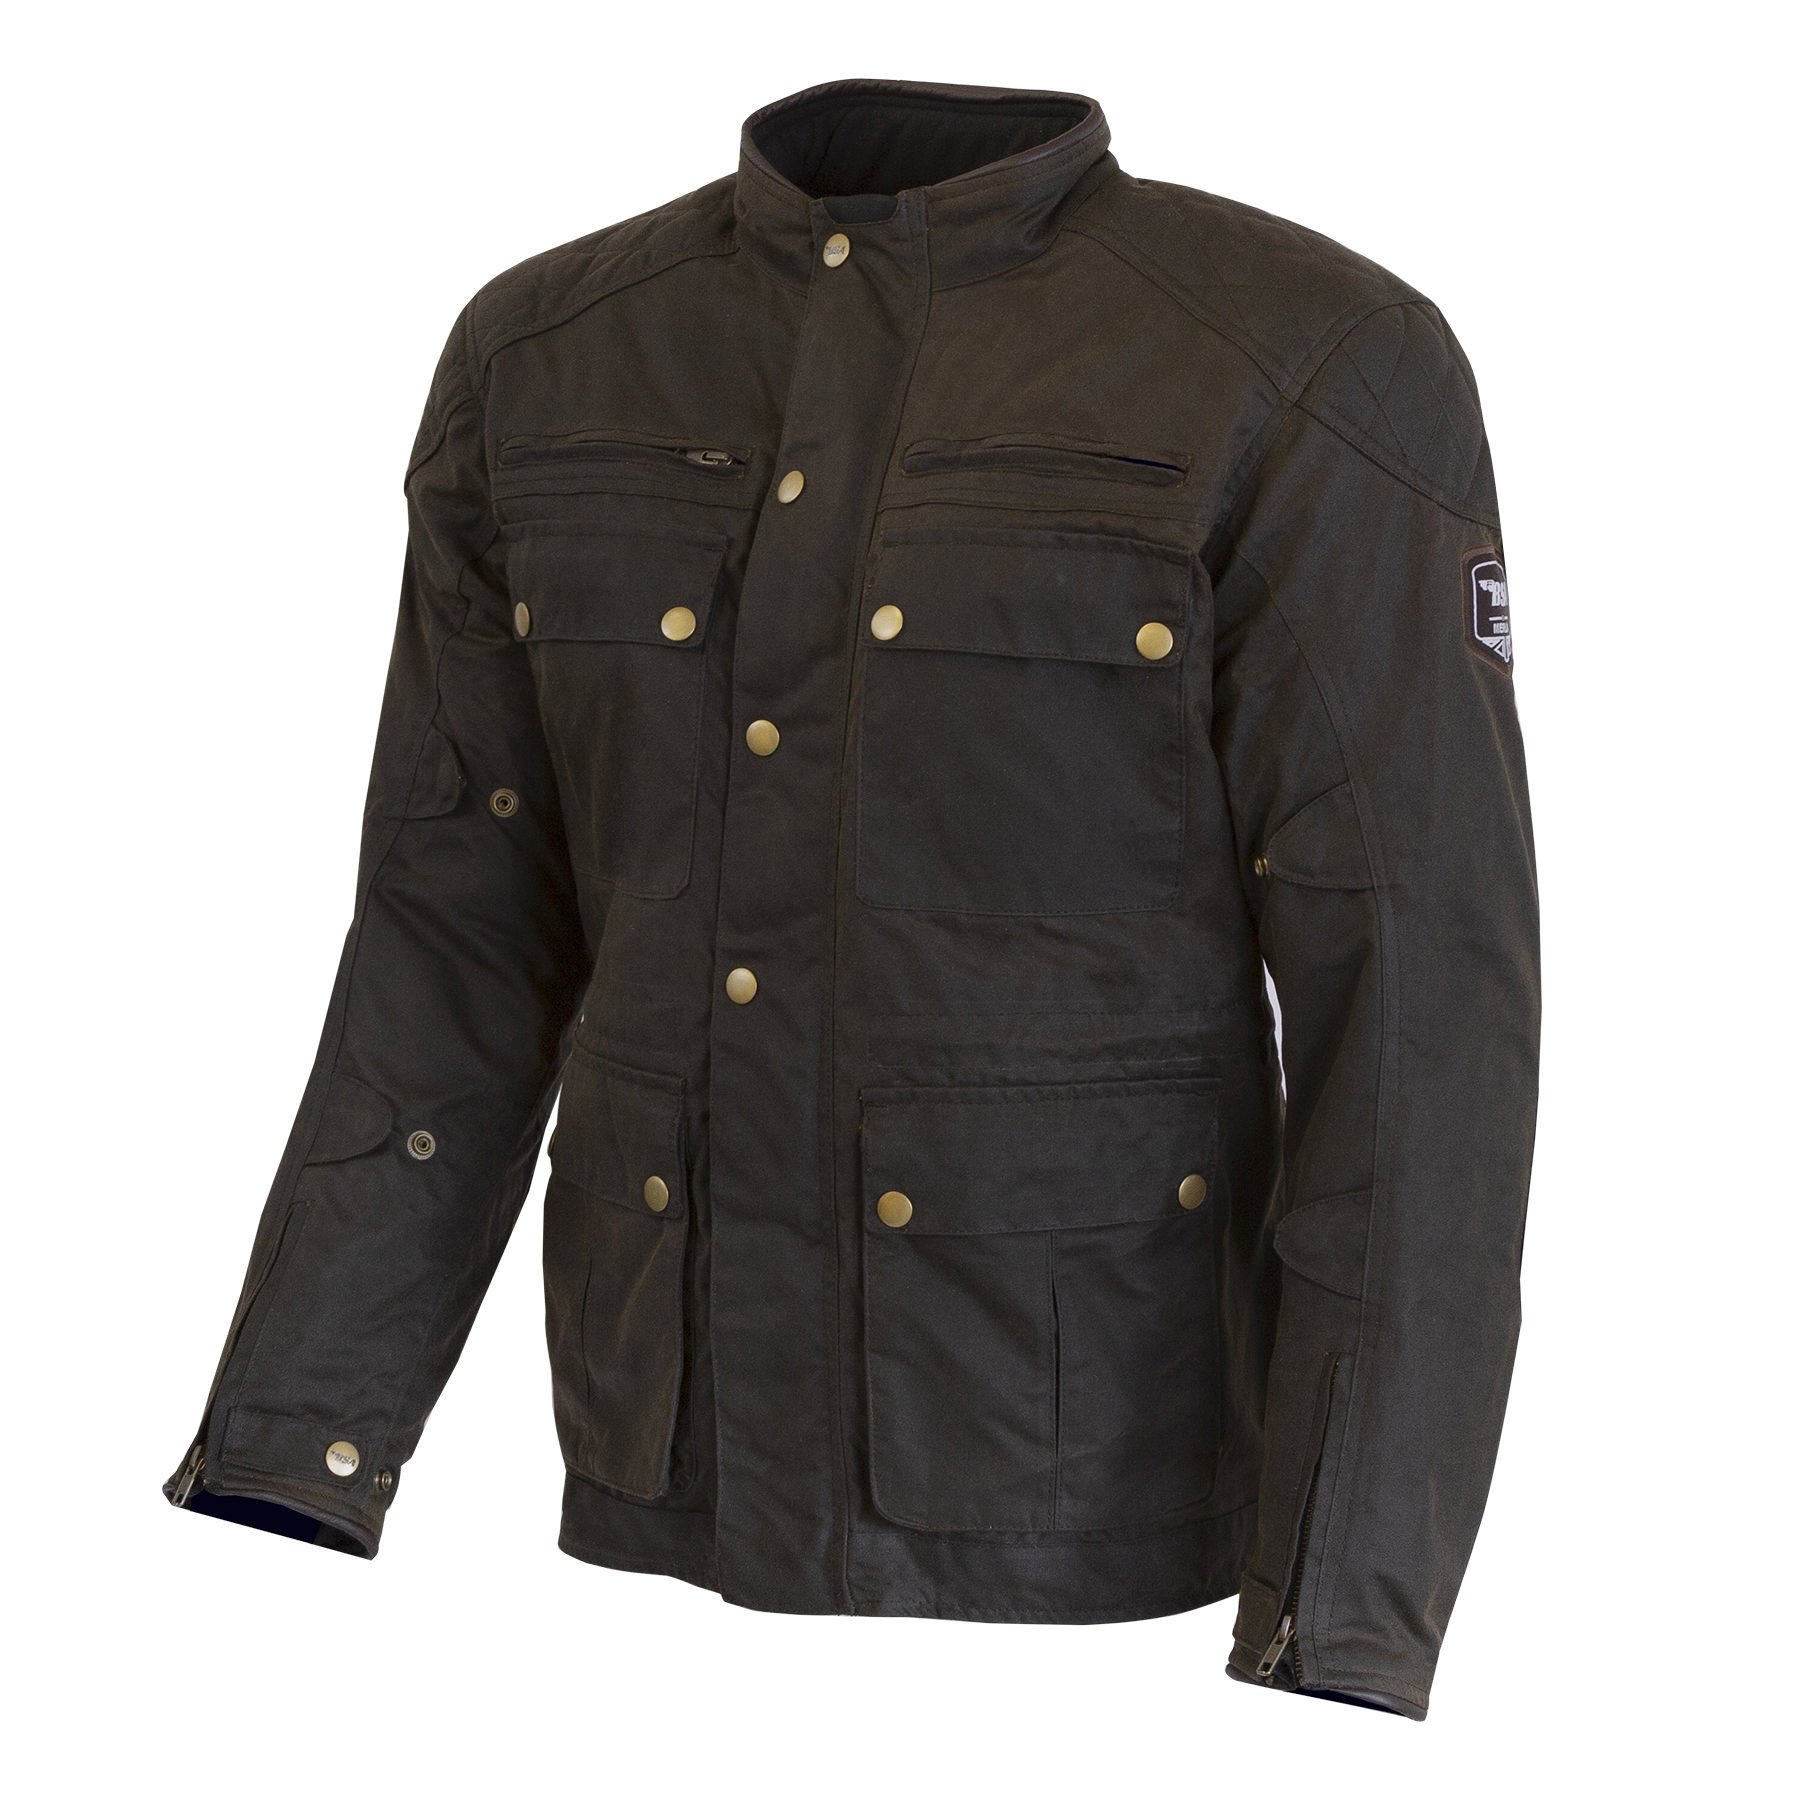 The Empire Waxed Cotton Jacket By BSA x Merlin Apparel